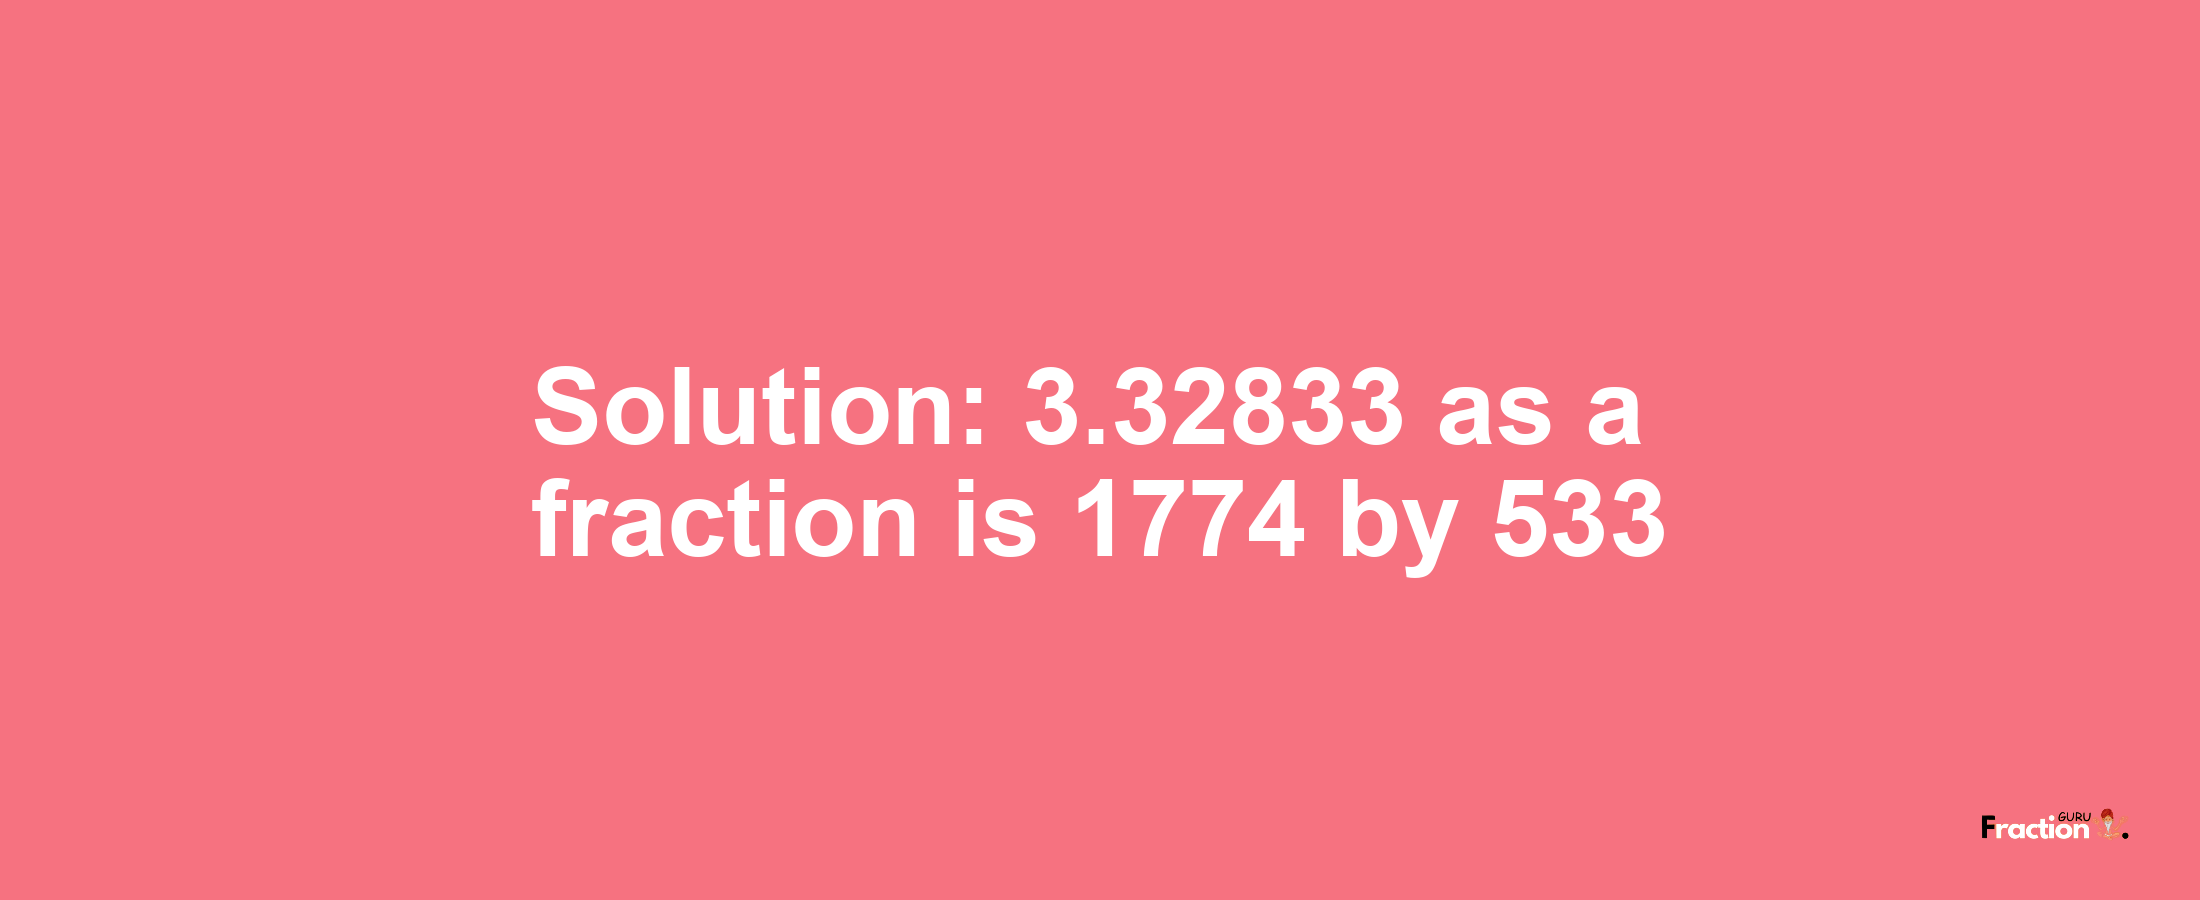 Solution:3.32833 as a fraction is 1774/533